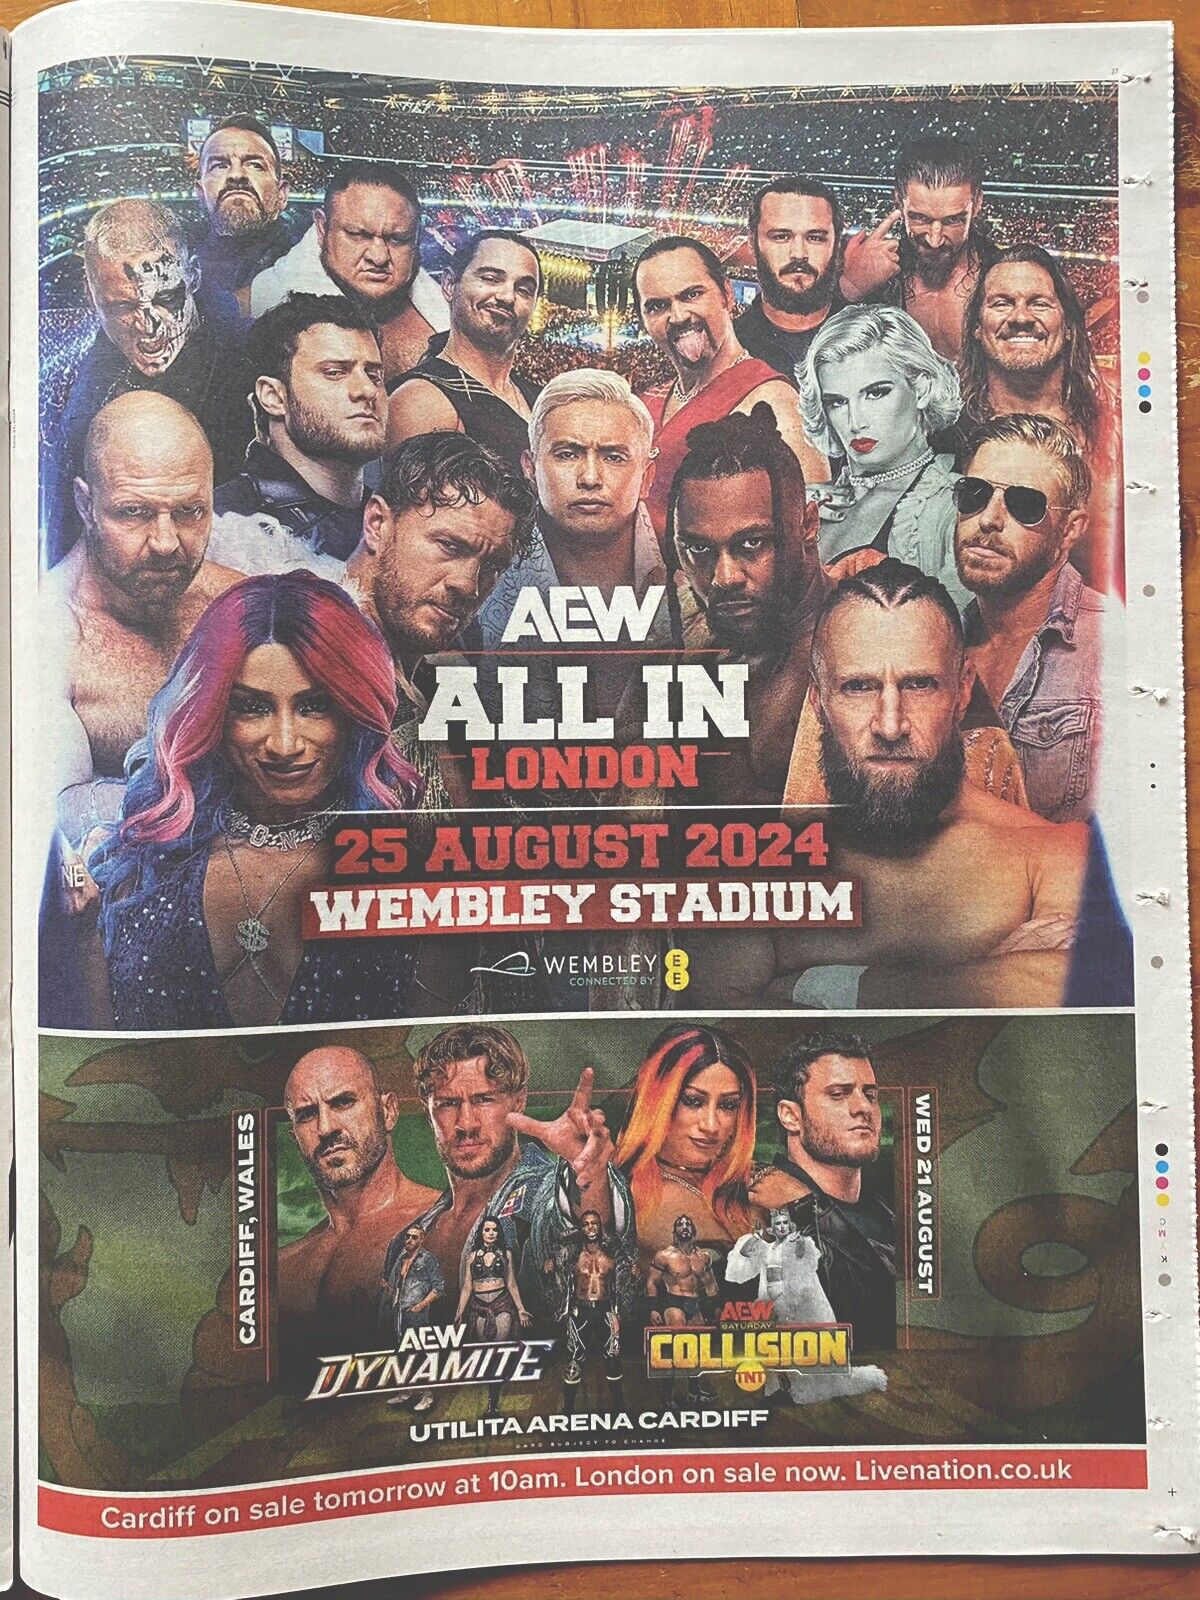 AEW All In London Wrestling Ad 2024 Wembley Newspaper Advert Poster 14x11” WWE